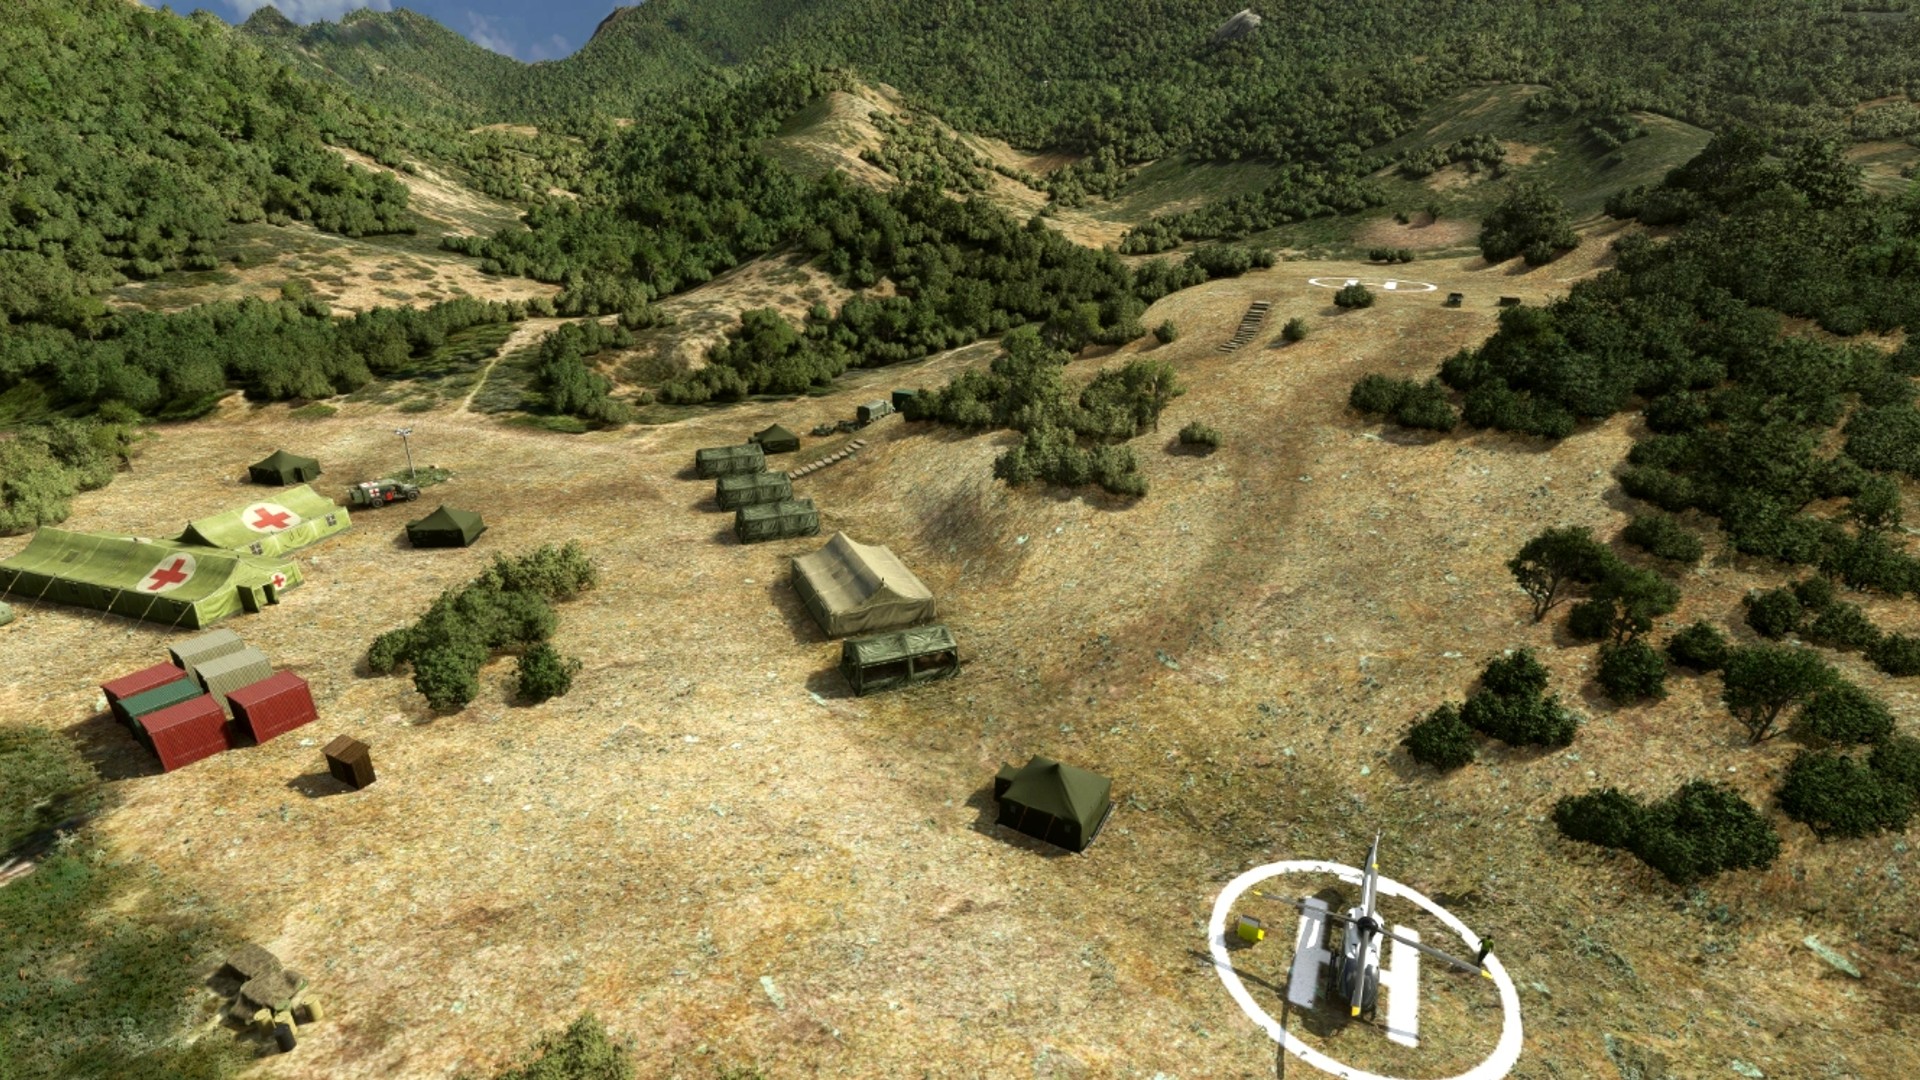 This free Microsoft Flight Simulator mod adds the set from TV's M*A*S*H